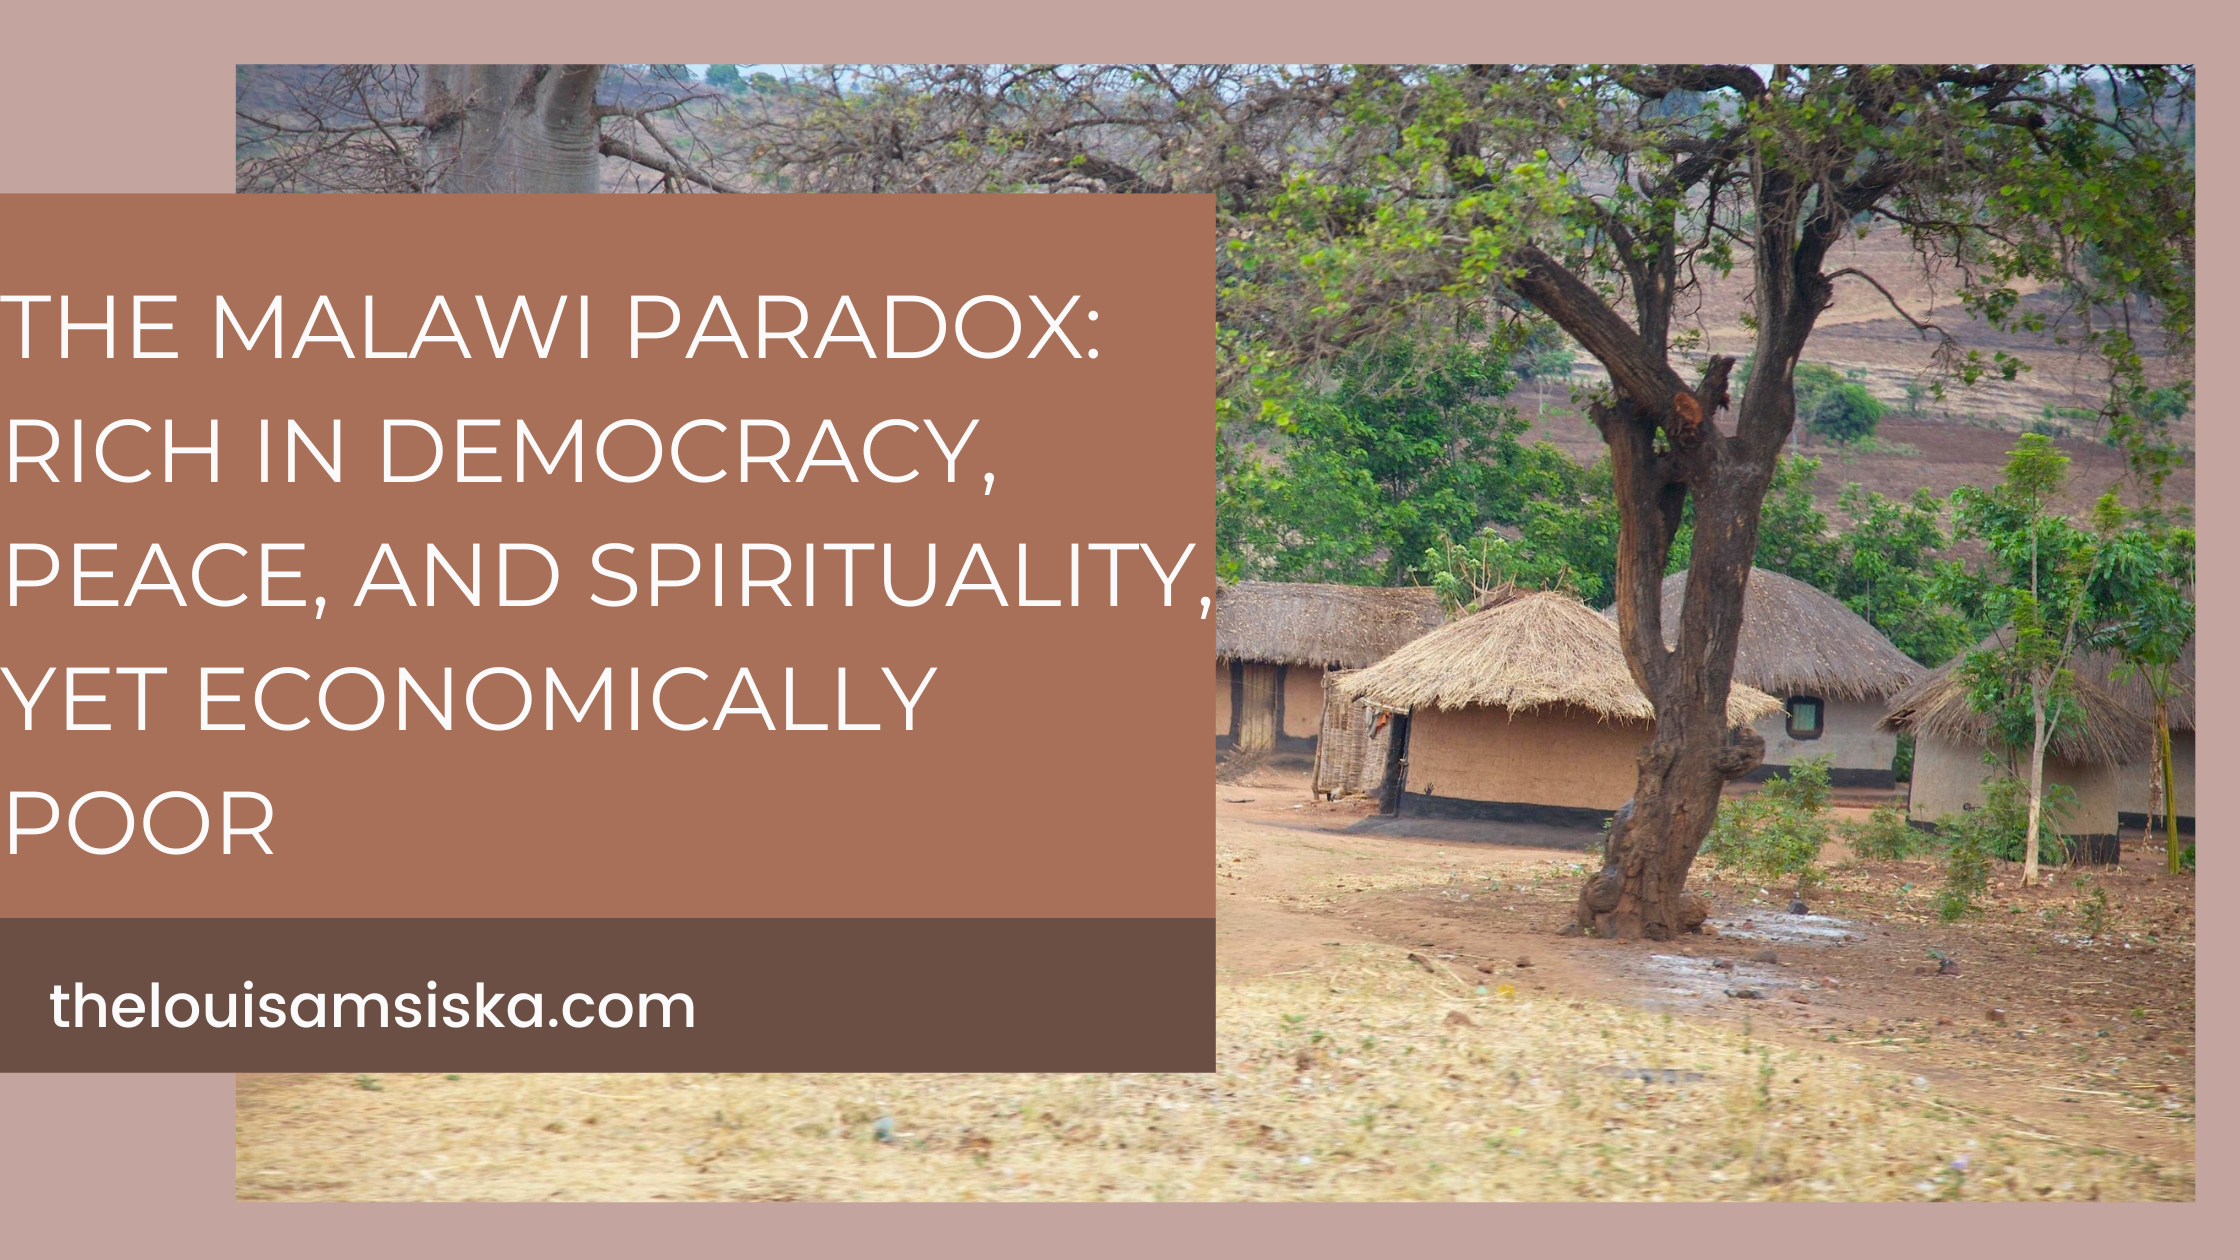 The Malawi Paradox: Rich In Democracy, Peace, and Spirit, Yet Economically Poor